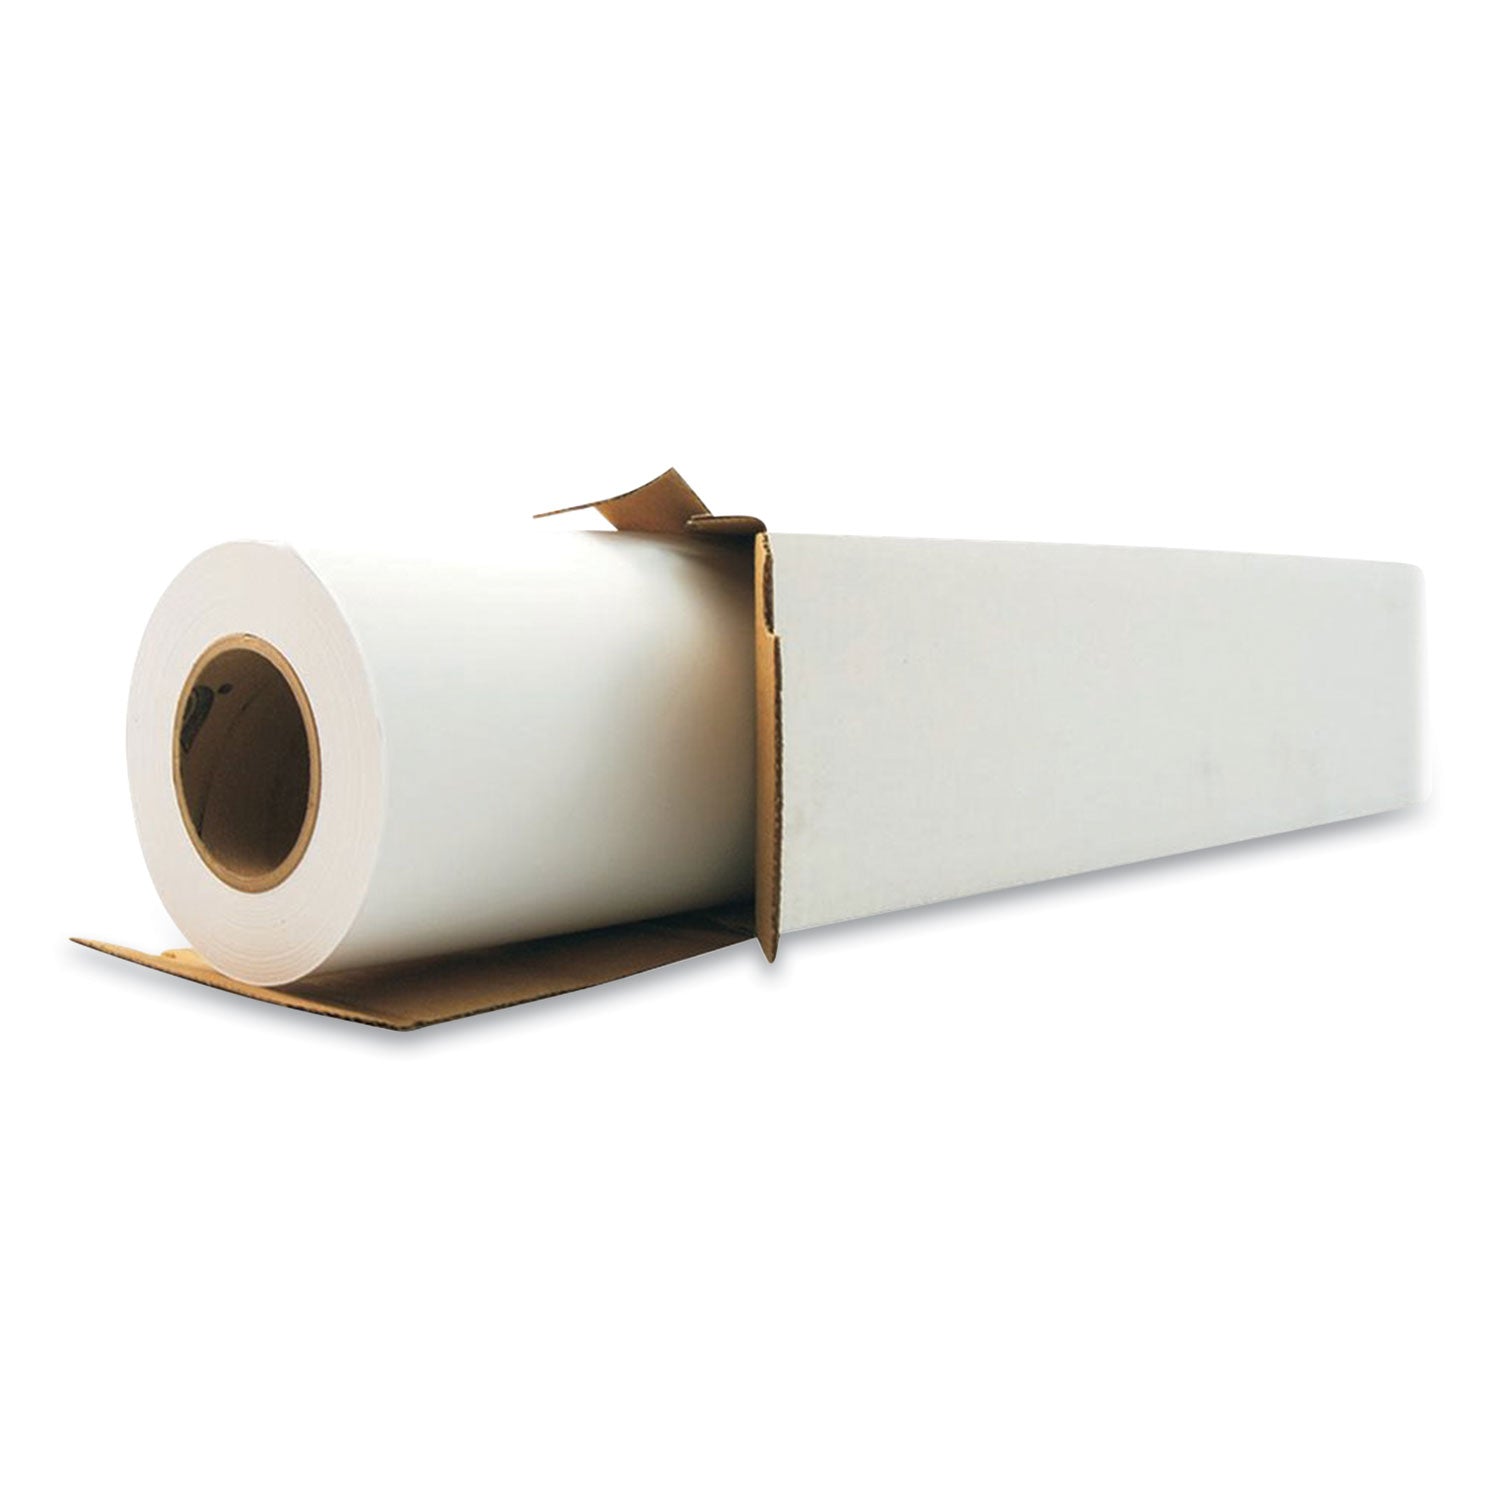 wide-format-professional-coated-bond-2-core-36-lb-bond-weight-36-x-100-ft-matte-white_aip2589 - 1